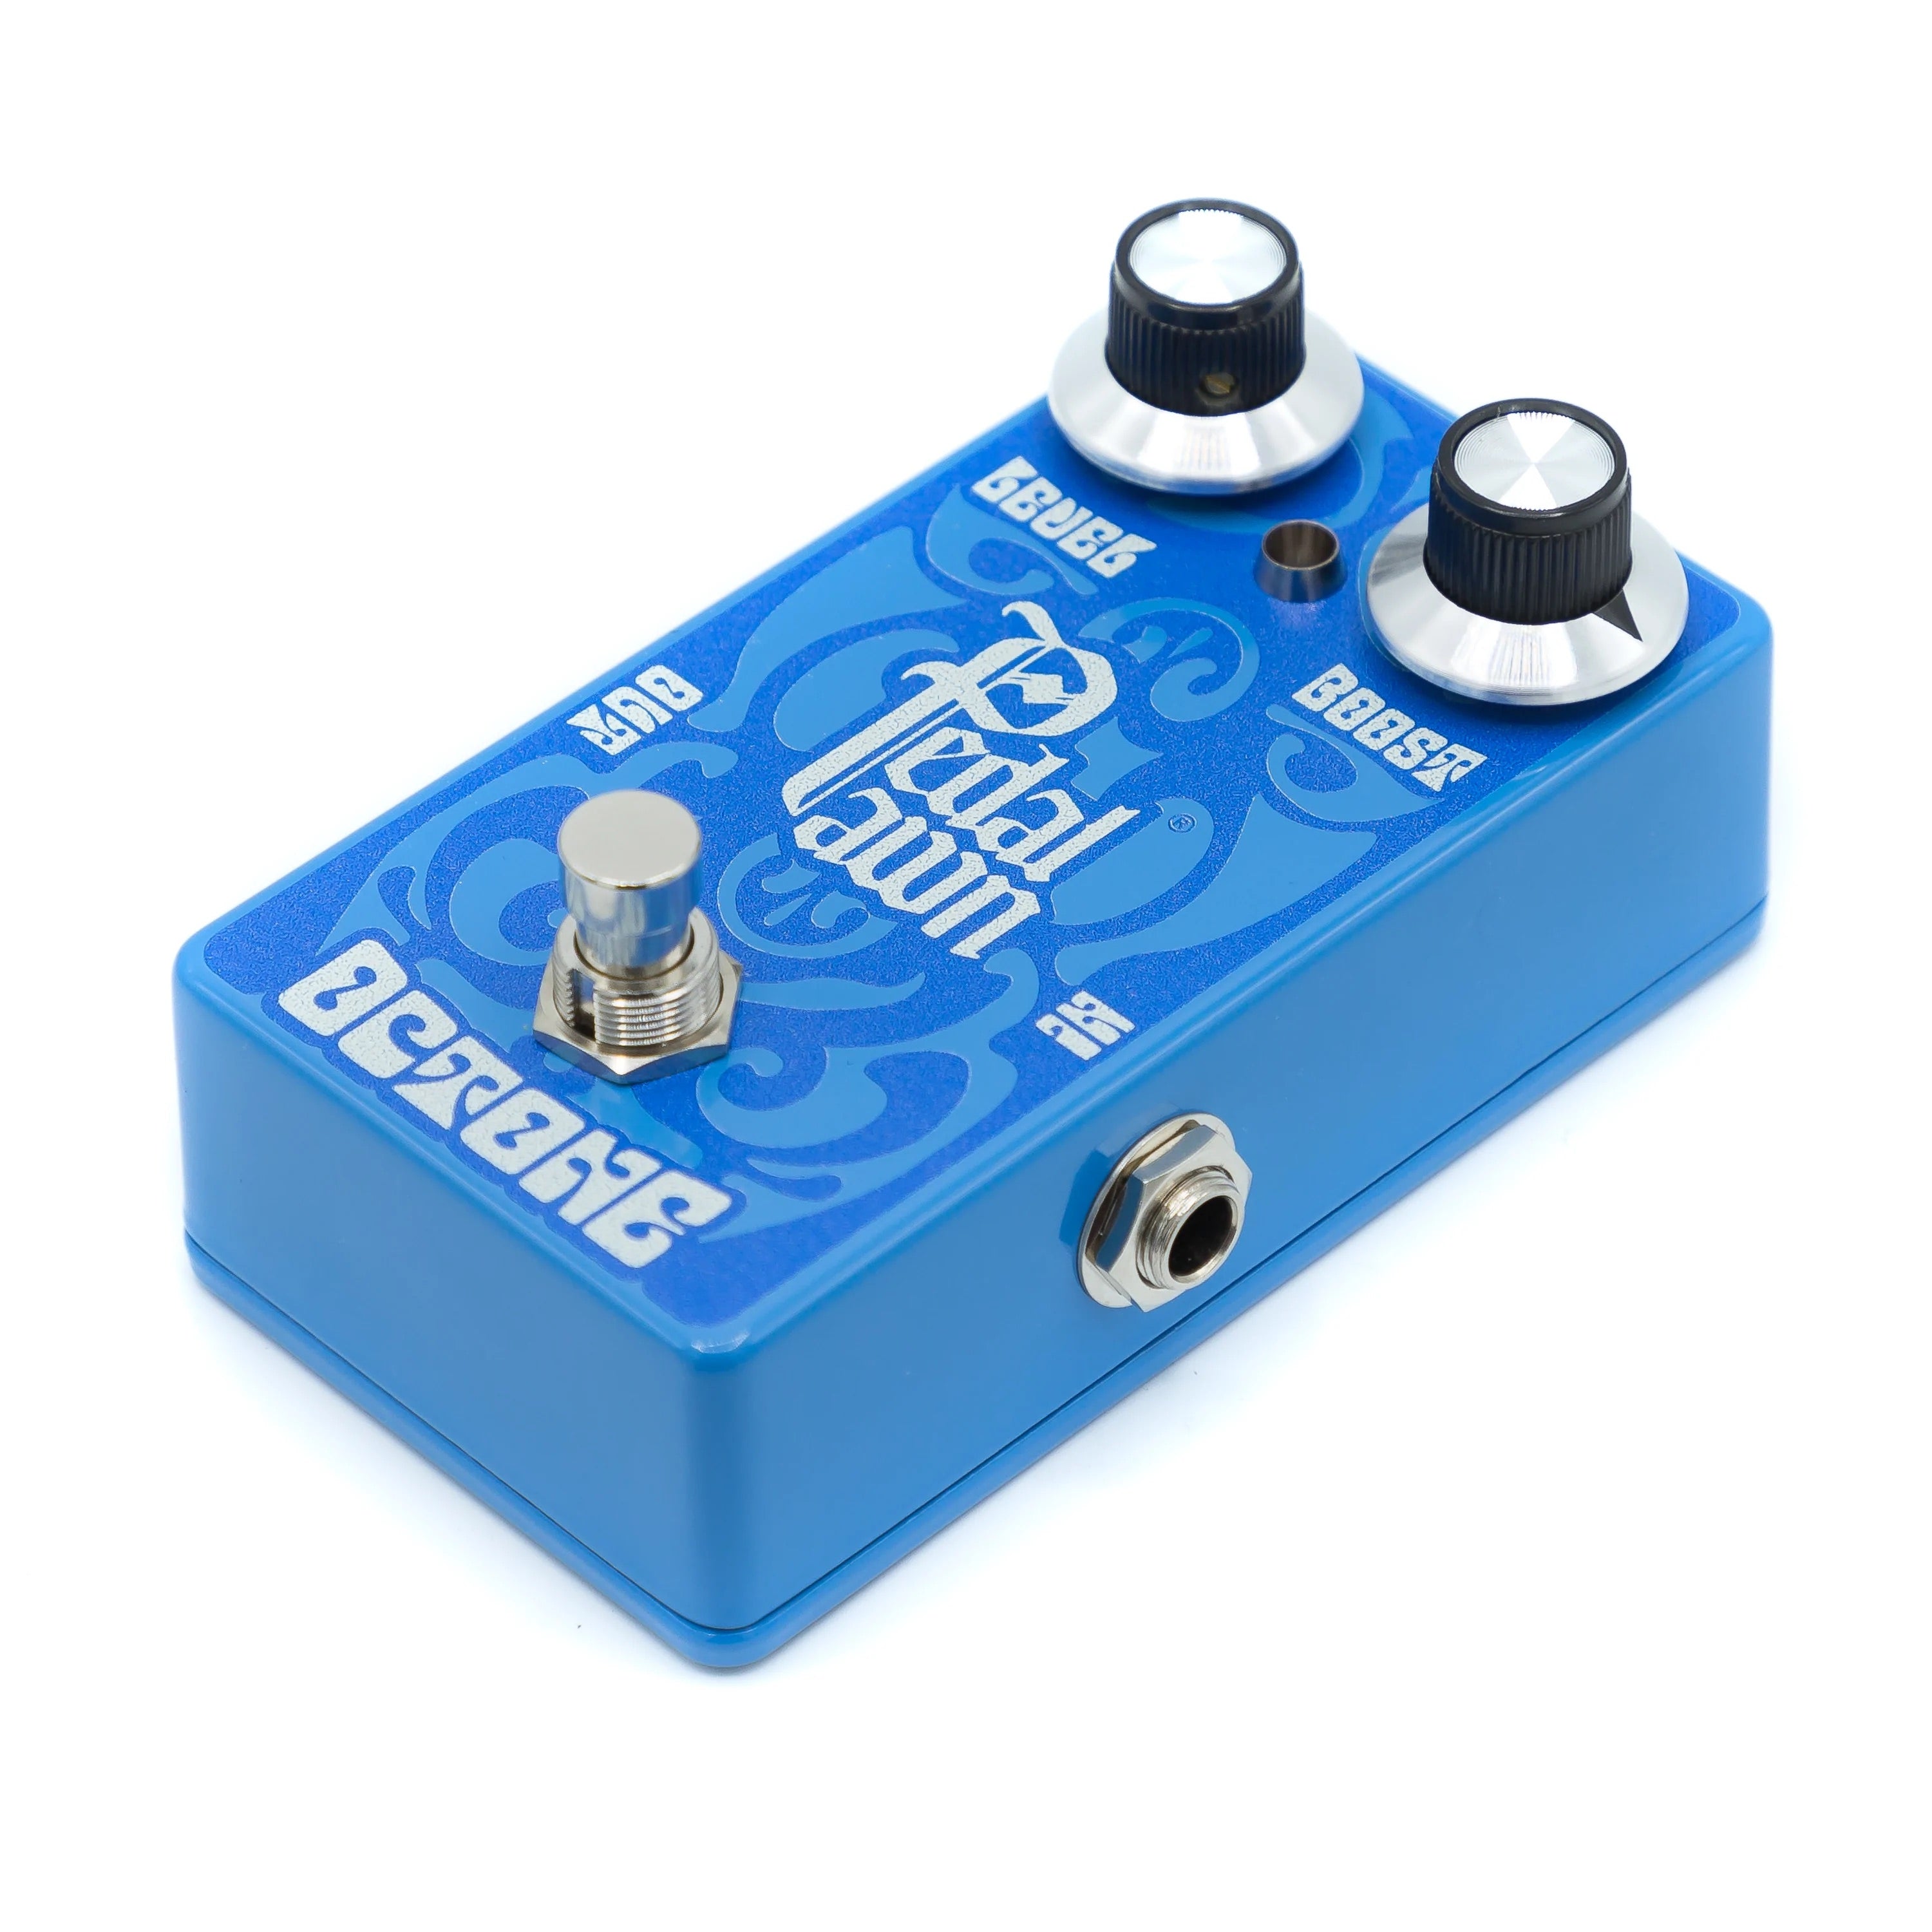 OCTONE ™ – Pedal Pawn